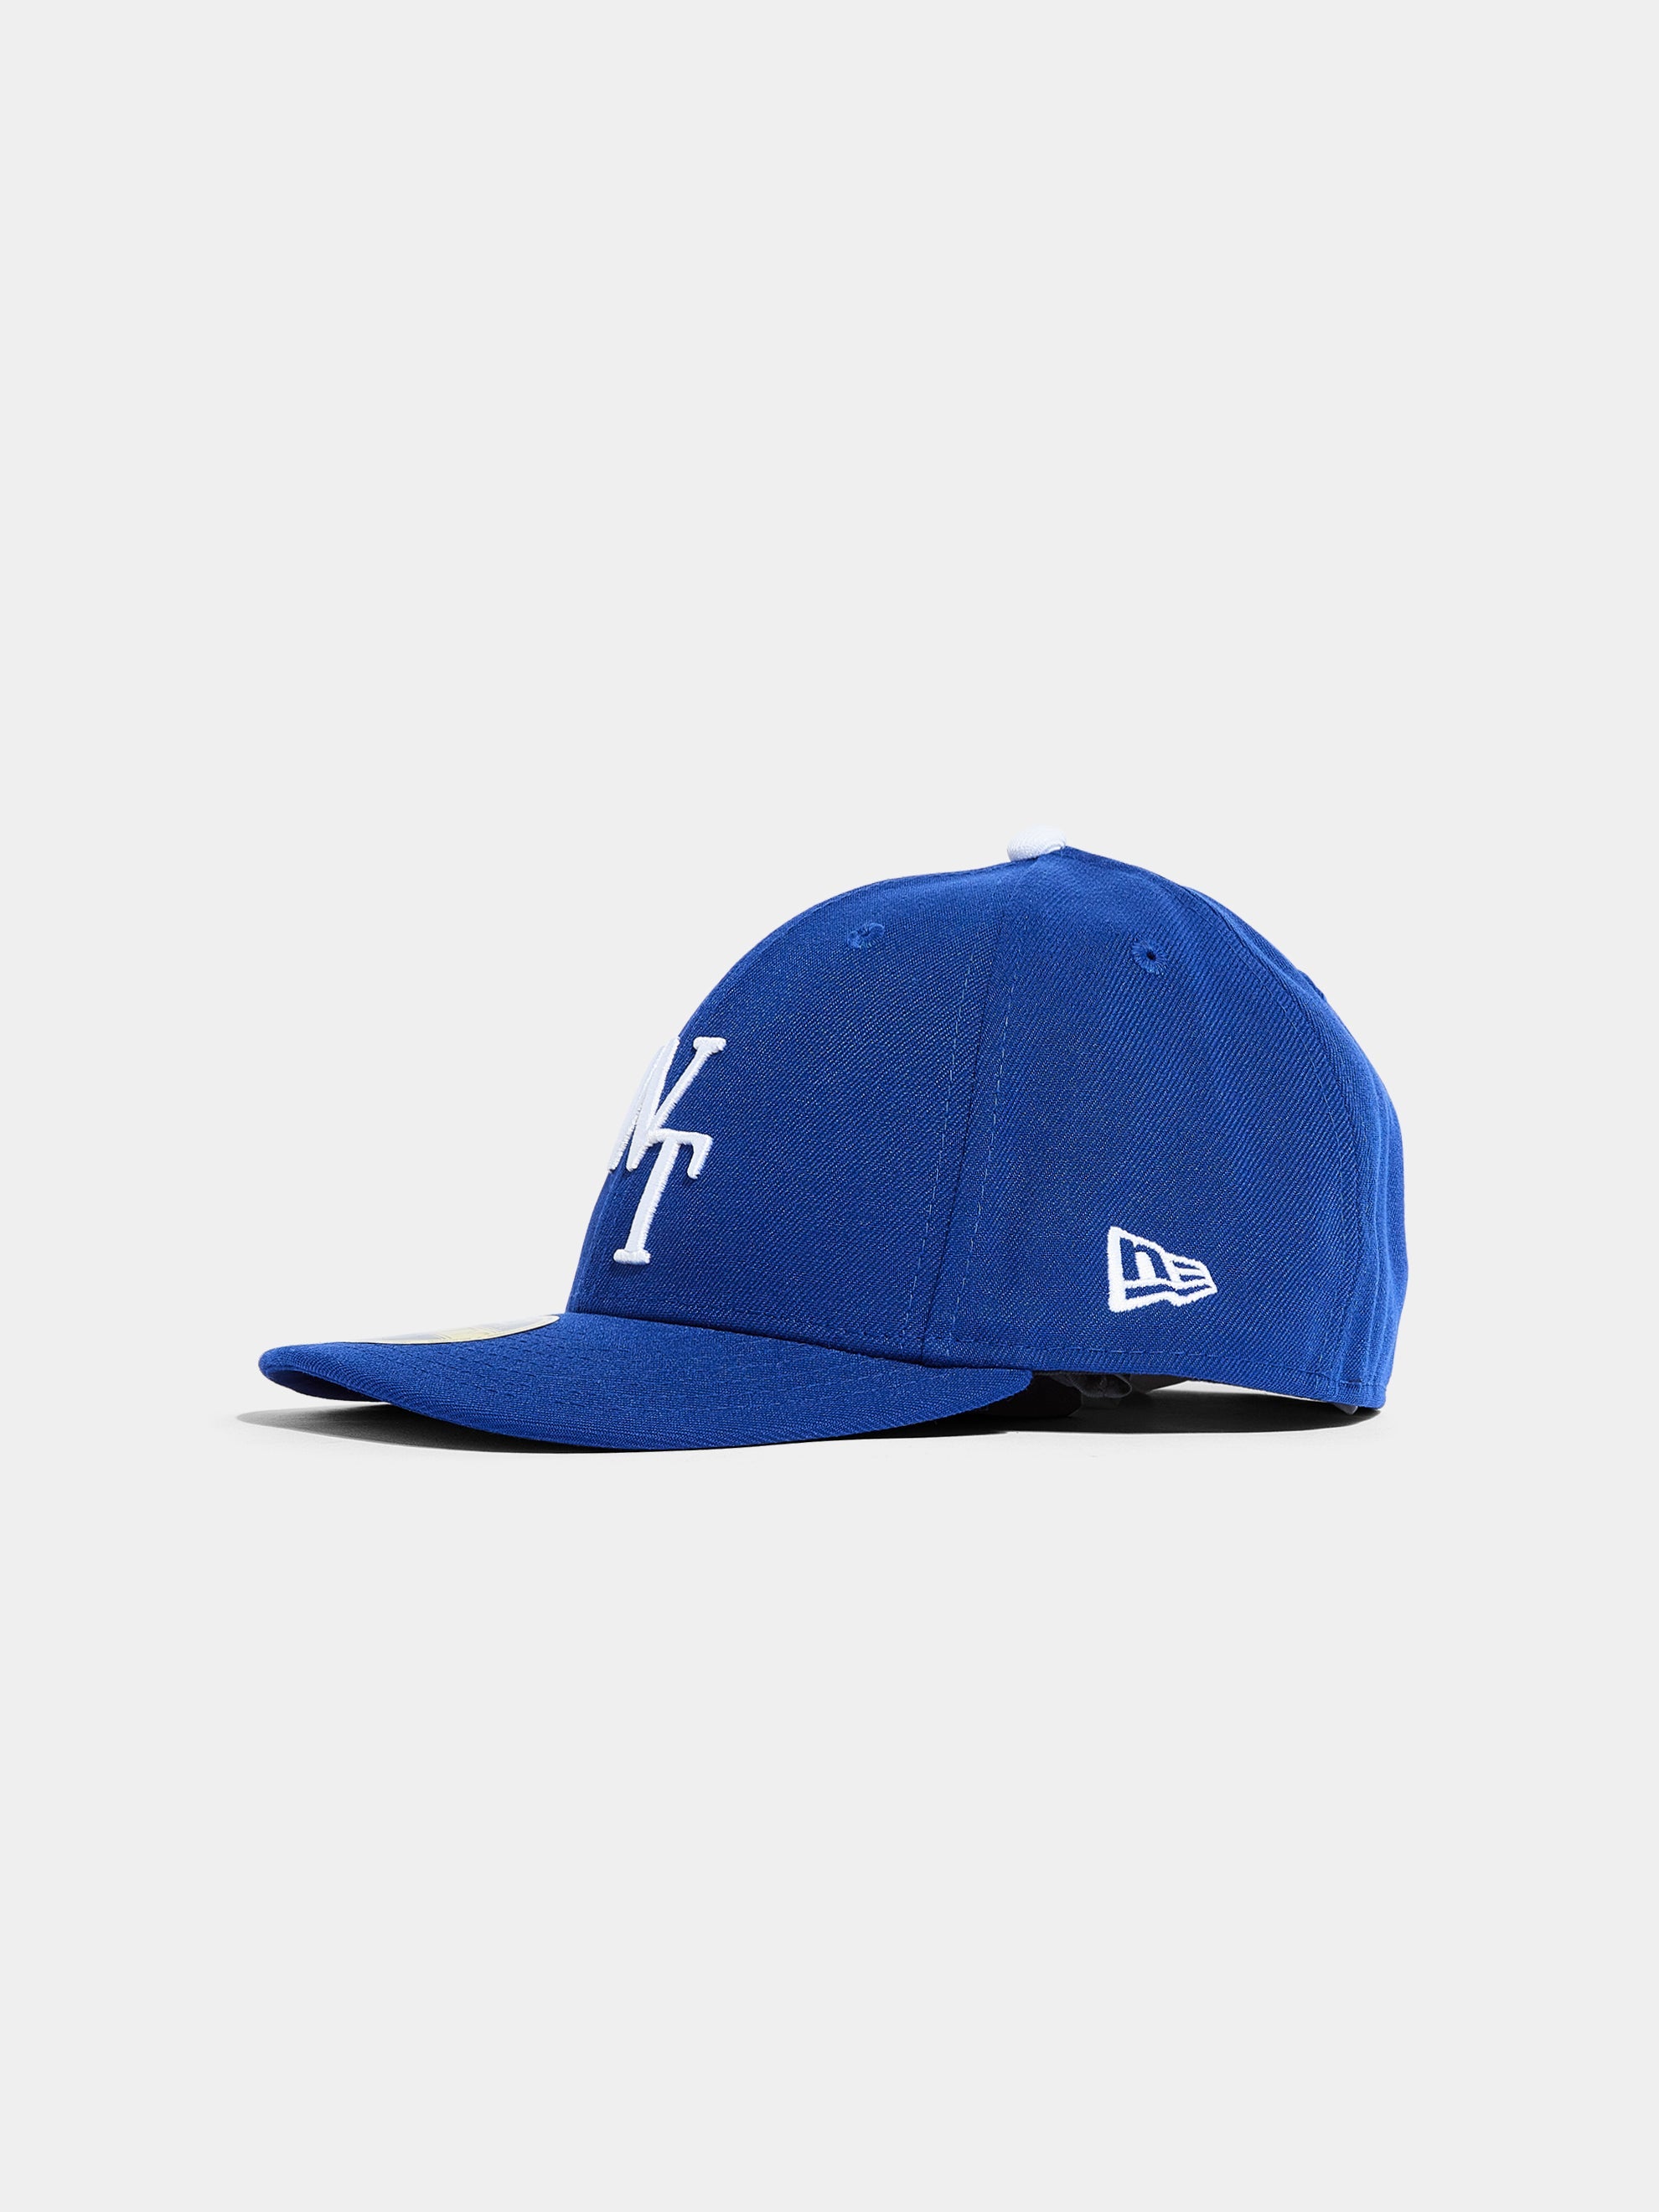 Buy Wtaps HAT 17 Online at UNION LOS ANGELES